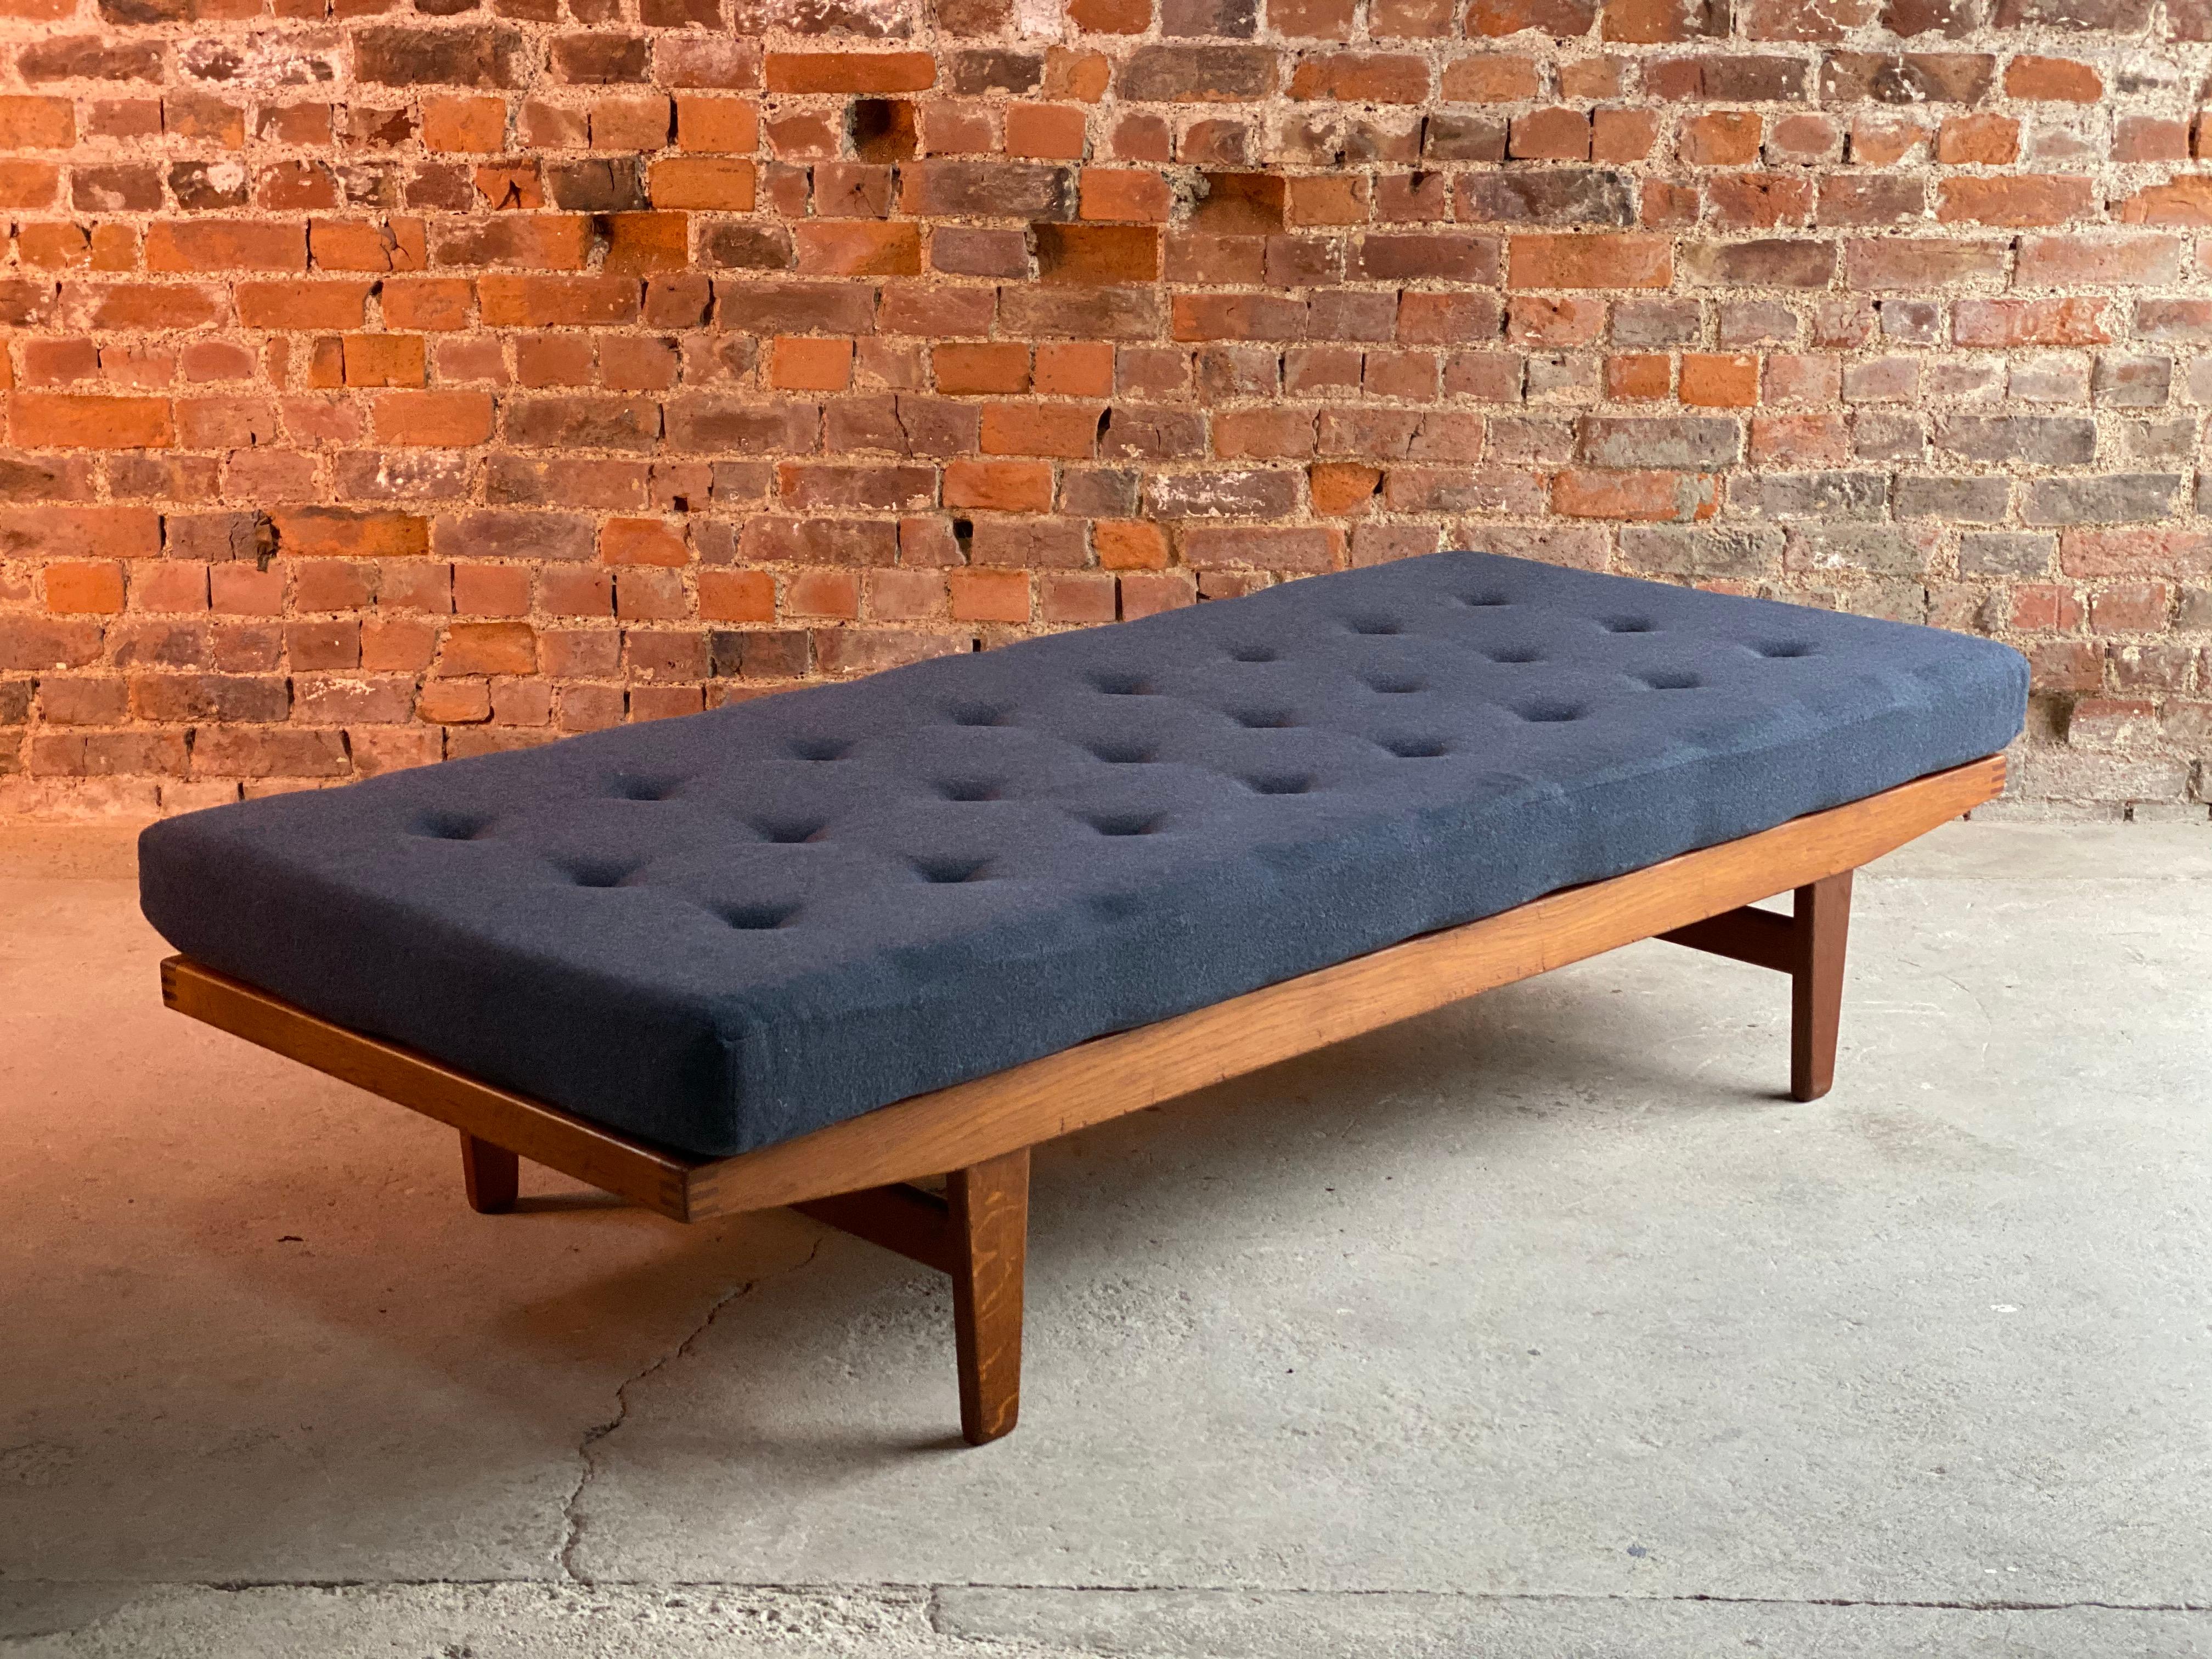 Midcentury Poul M. Volther Model H9 daybed FDB Mobler Danish, circa 1960s

Fabulous Poul M. Volther Model H9 daybed for FDB Mobler circa 1960, the button back blue wool covered mattress over beech frame, with slats, makers mark to